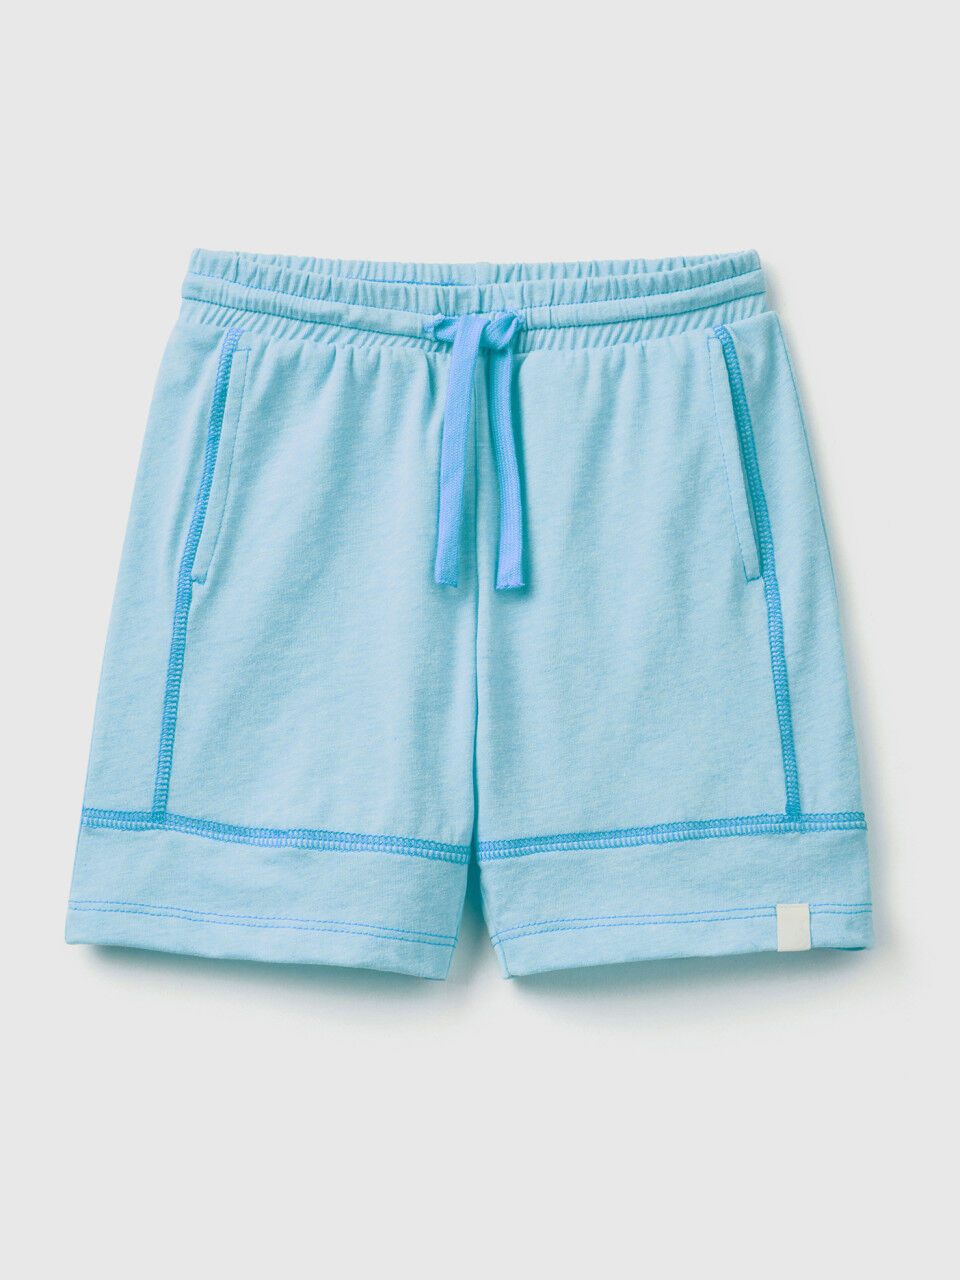 Shorts in recycled fabric